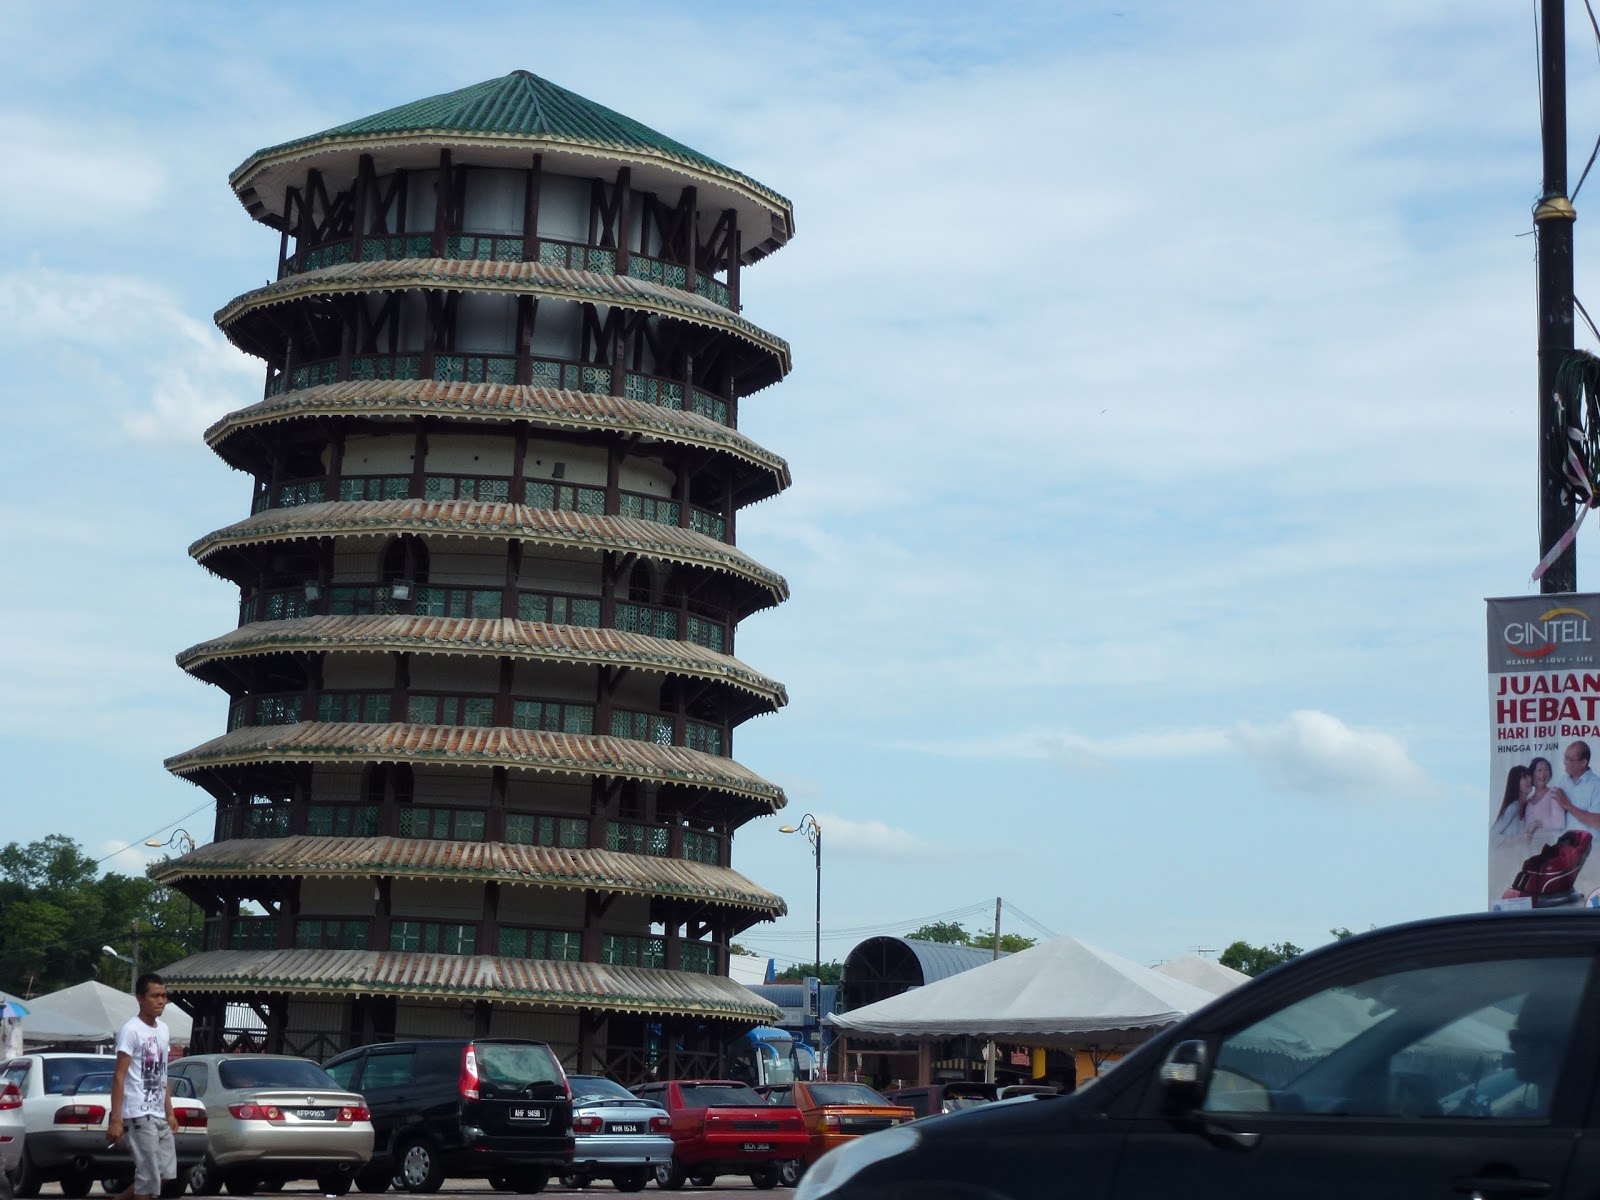 A Thousand Reasons: The Leaning Tower of Teluk Intan.